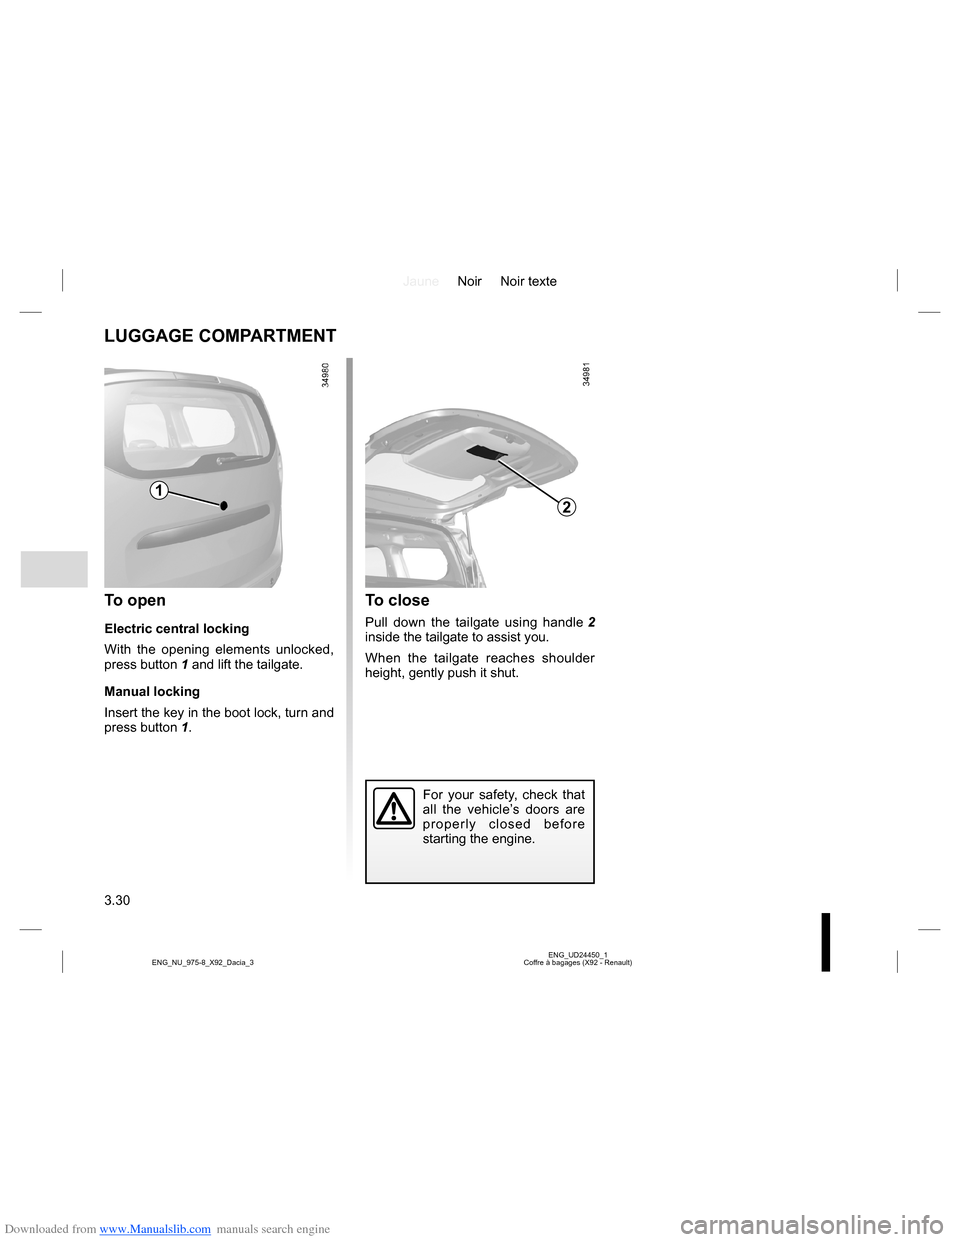 DACIA LODGY 2013 1.G Service Manual Downloaded from www.Manualslib.com manuals search engine JauneNoir Noir texte
3.30
ENG_UD24450_1
Coffre à bagages (X92 - Renault) ENG_NU_975-8_X92_Dacia_3
LUGGAGE COMPARTMENT
To open
Electric central